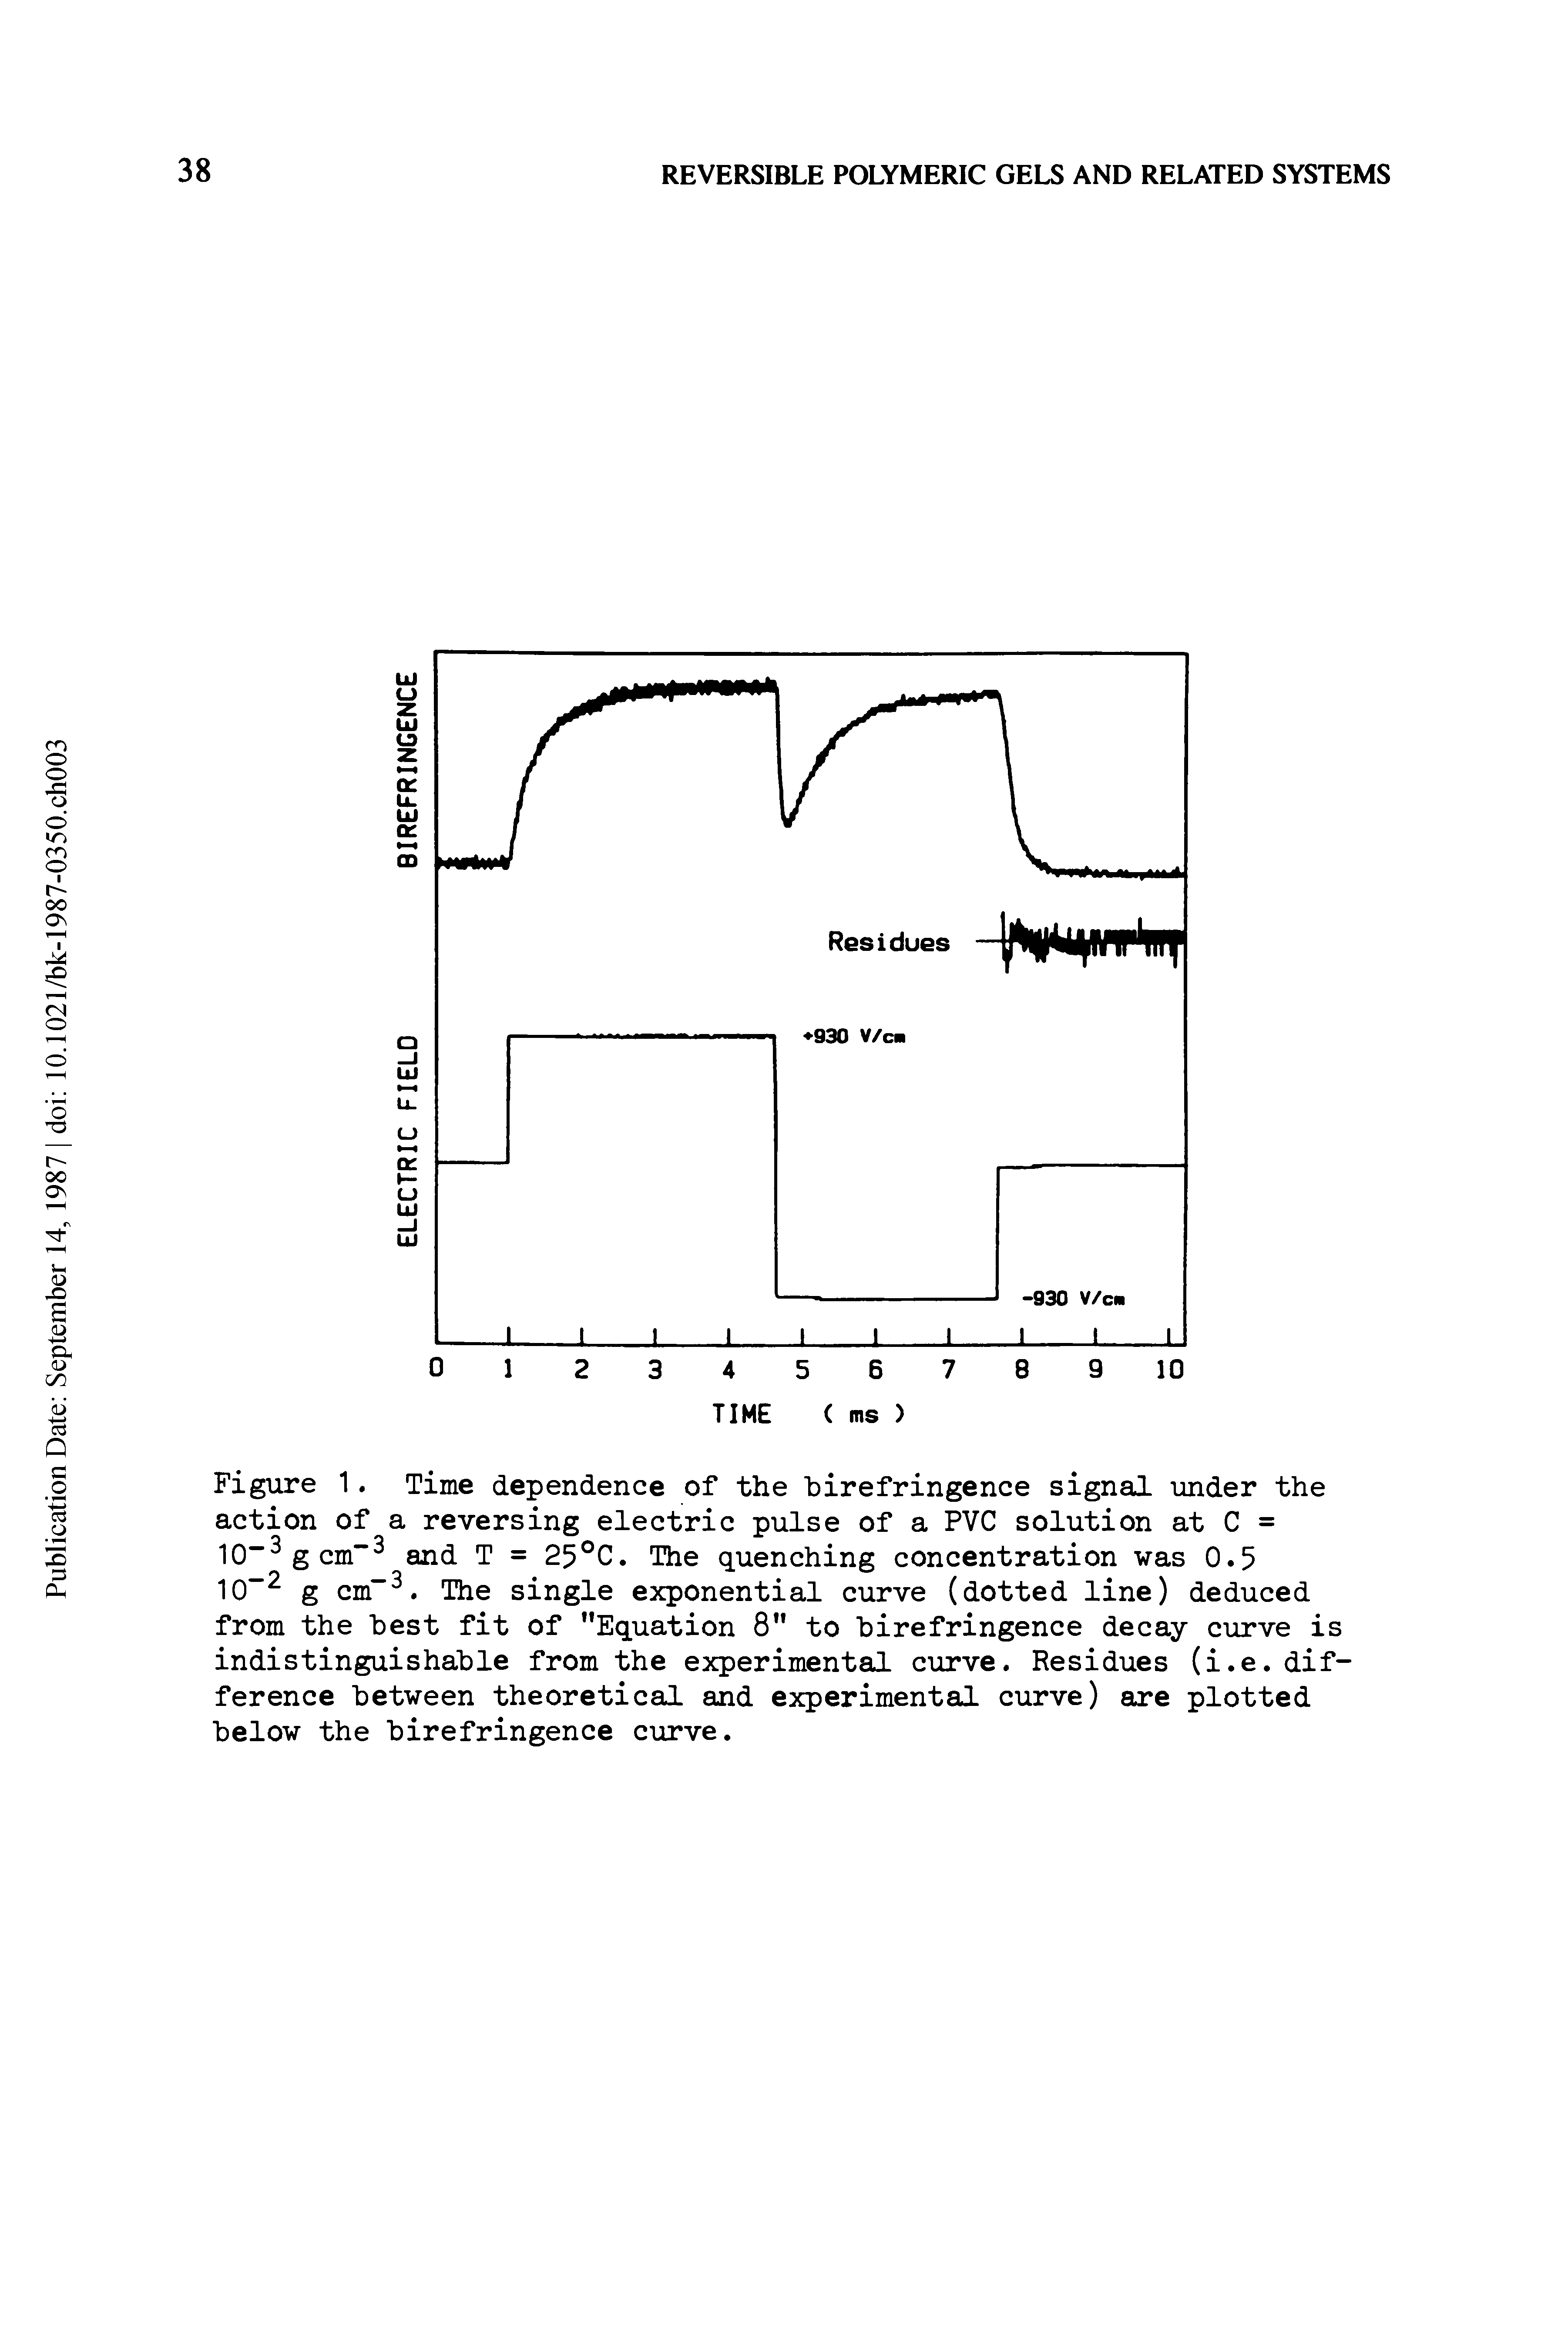 Figure 1. Time dependence of the birefringence signal under the action of a reversing electric pulse of a PVC solution at C = 10 gcm and T = 25°C. The quenching concentration was 0.5 10 g cm". The single exponential curve (dotted line) deduced from the best fit of "Equation 8" to birefringence decay curve is indistinguishable from the experimental curve. Residues (i.e. difference between theoretical and experimental curve) are plotted below the birefringence curve.